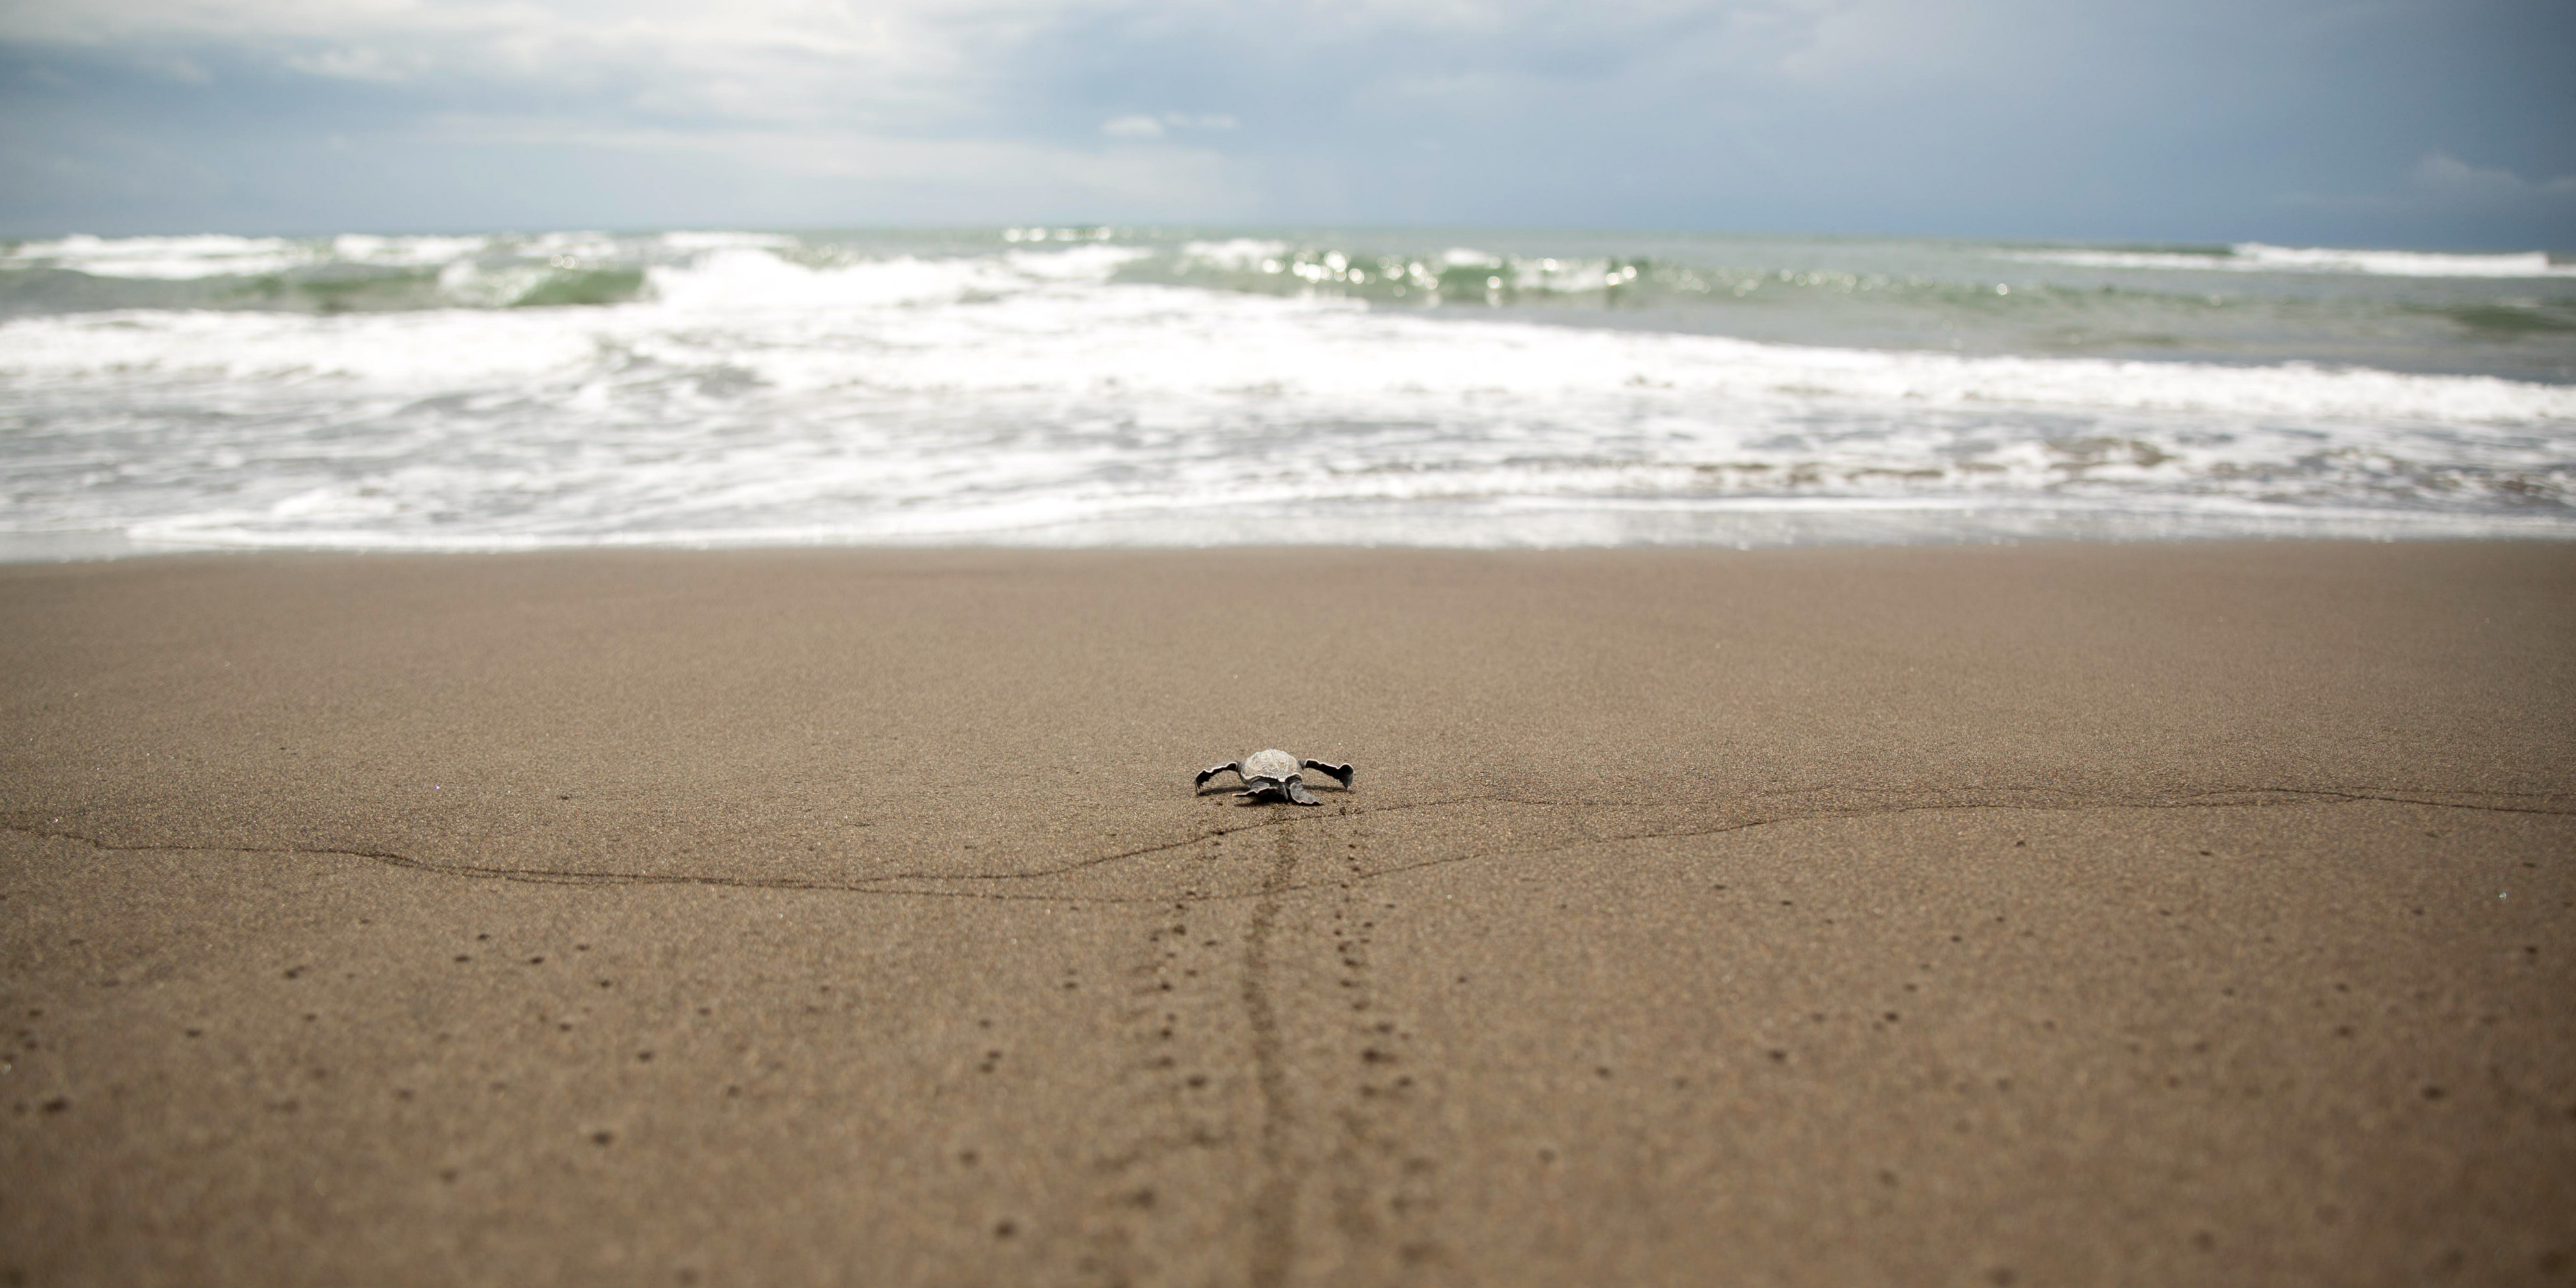 One of the endangered sea turtles in costa rica makes its way to the ocean.